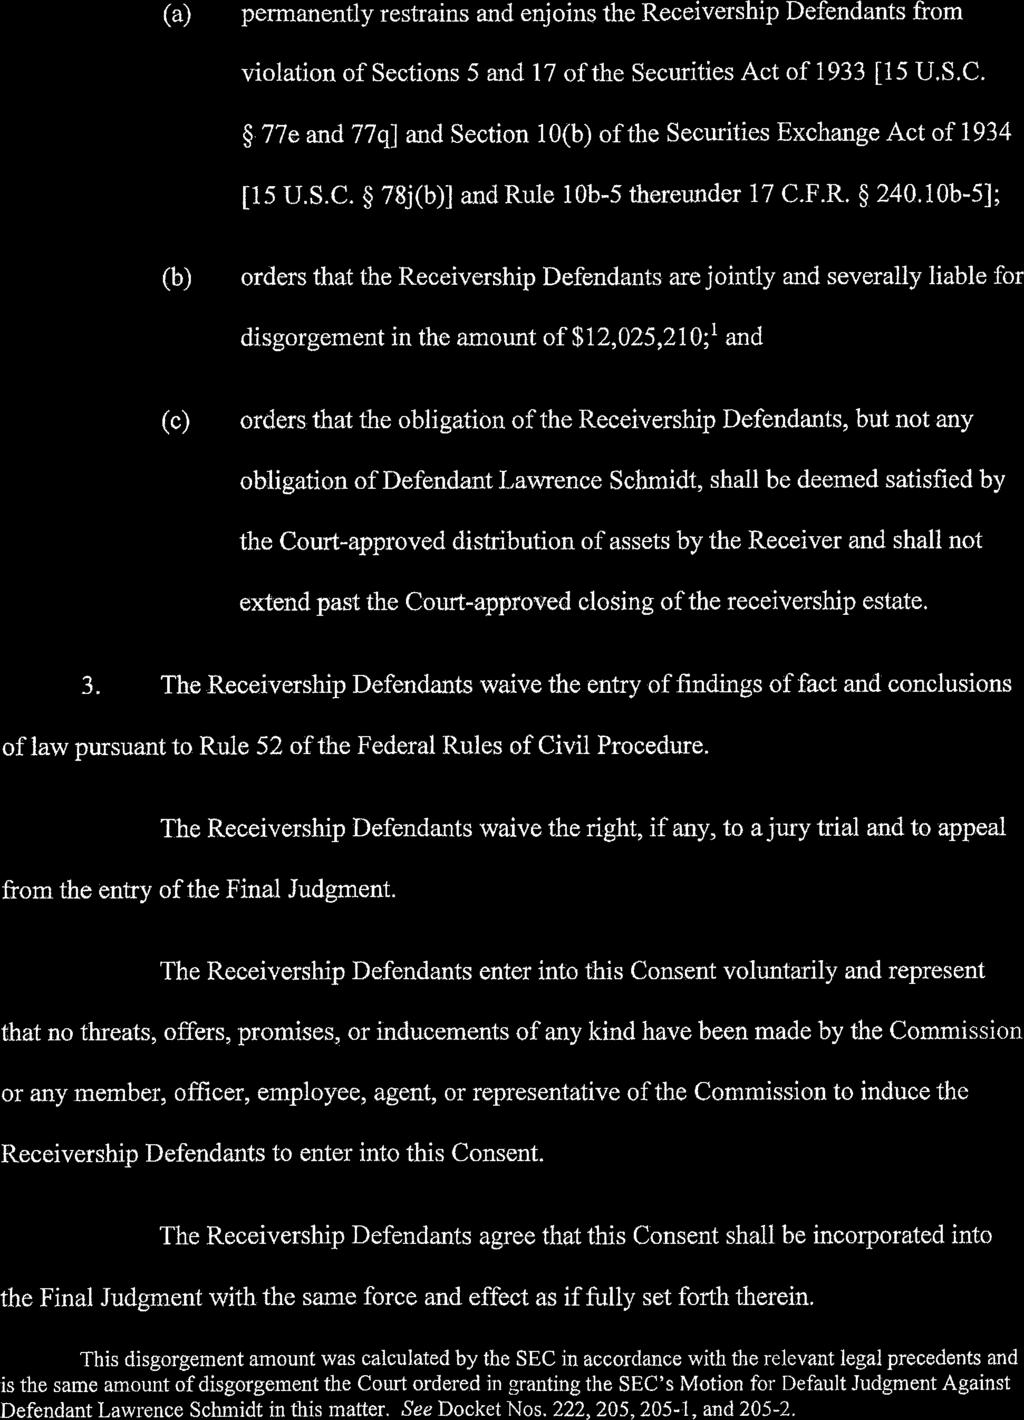 Case 1:14-cv-01002-CRC Document 238 Filed 03/08/19 Page 2 of 11 (a) permanently restrains and enjoins the Receivership Defendants from violation of Sections 5 and 17 of the Securities Act of 1933 [15